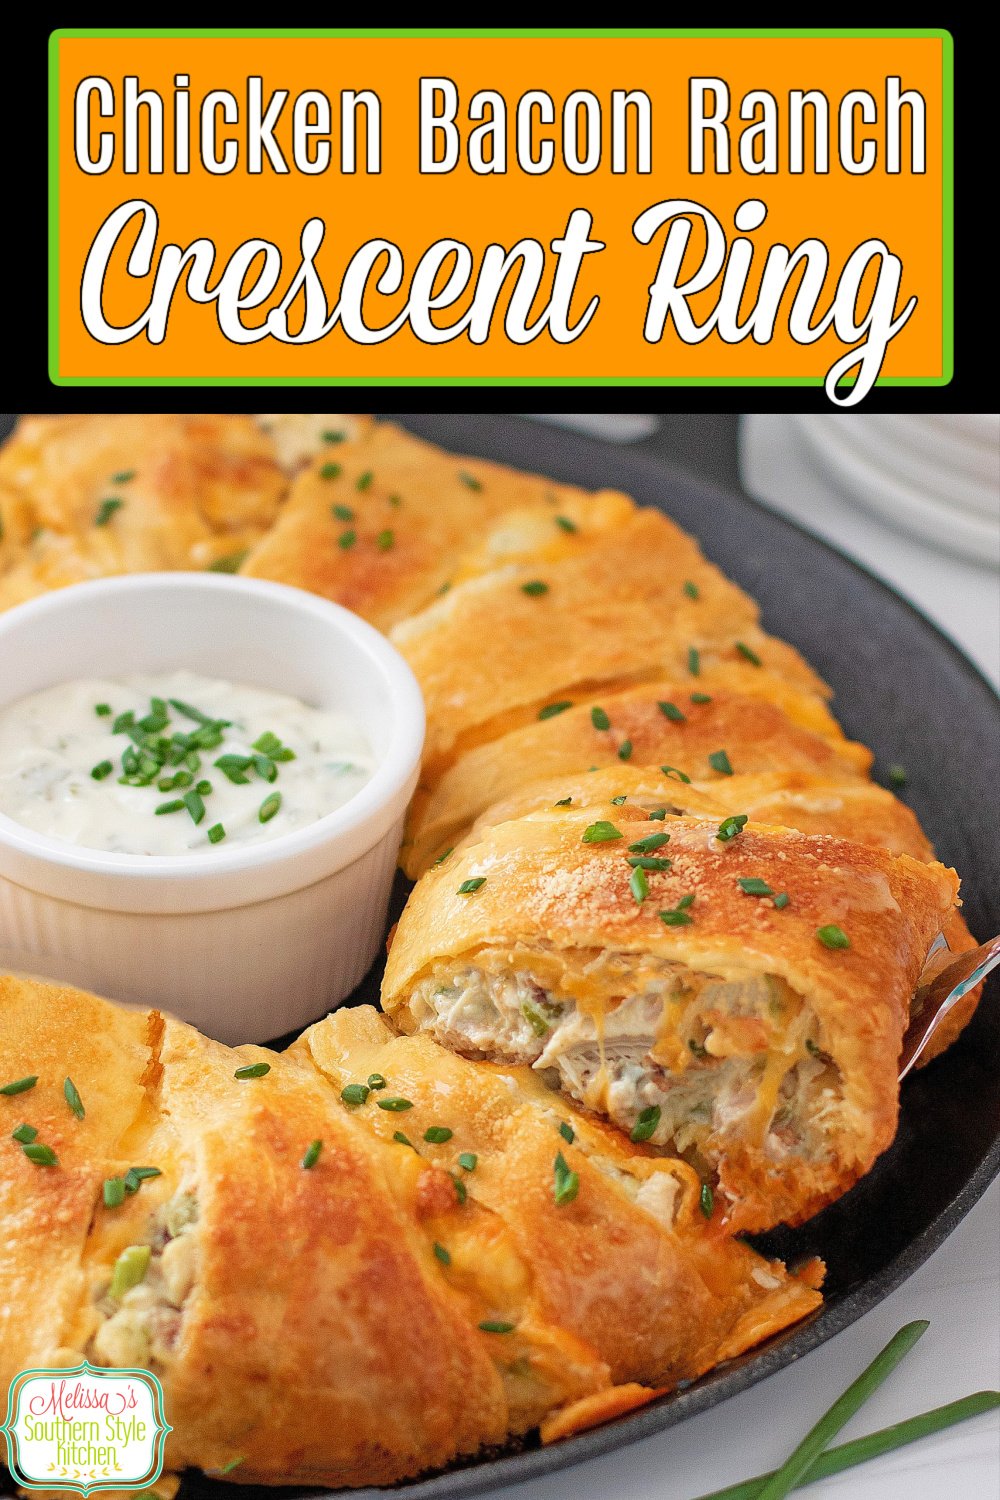 Serve this Chicken Bacon Ranch Crescent Ring for causal meals and game day snacking #chickenrecipes #crescentrollrecipes #crescentolls #crescentring #chickenbaconranch #bacon #appetizers #easyrecipes #southernfood via @melissasssk